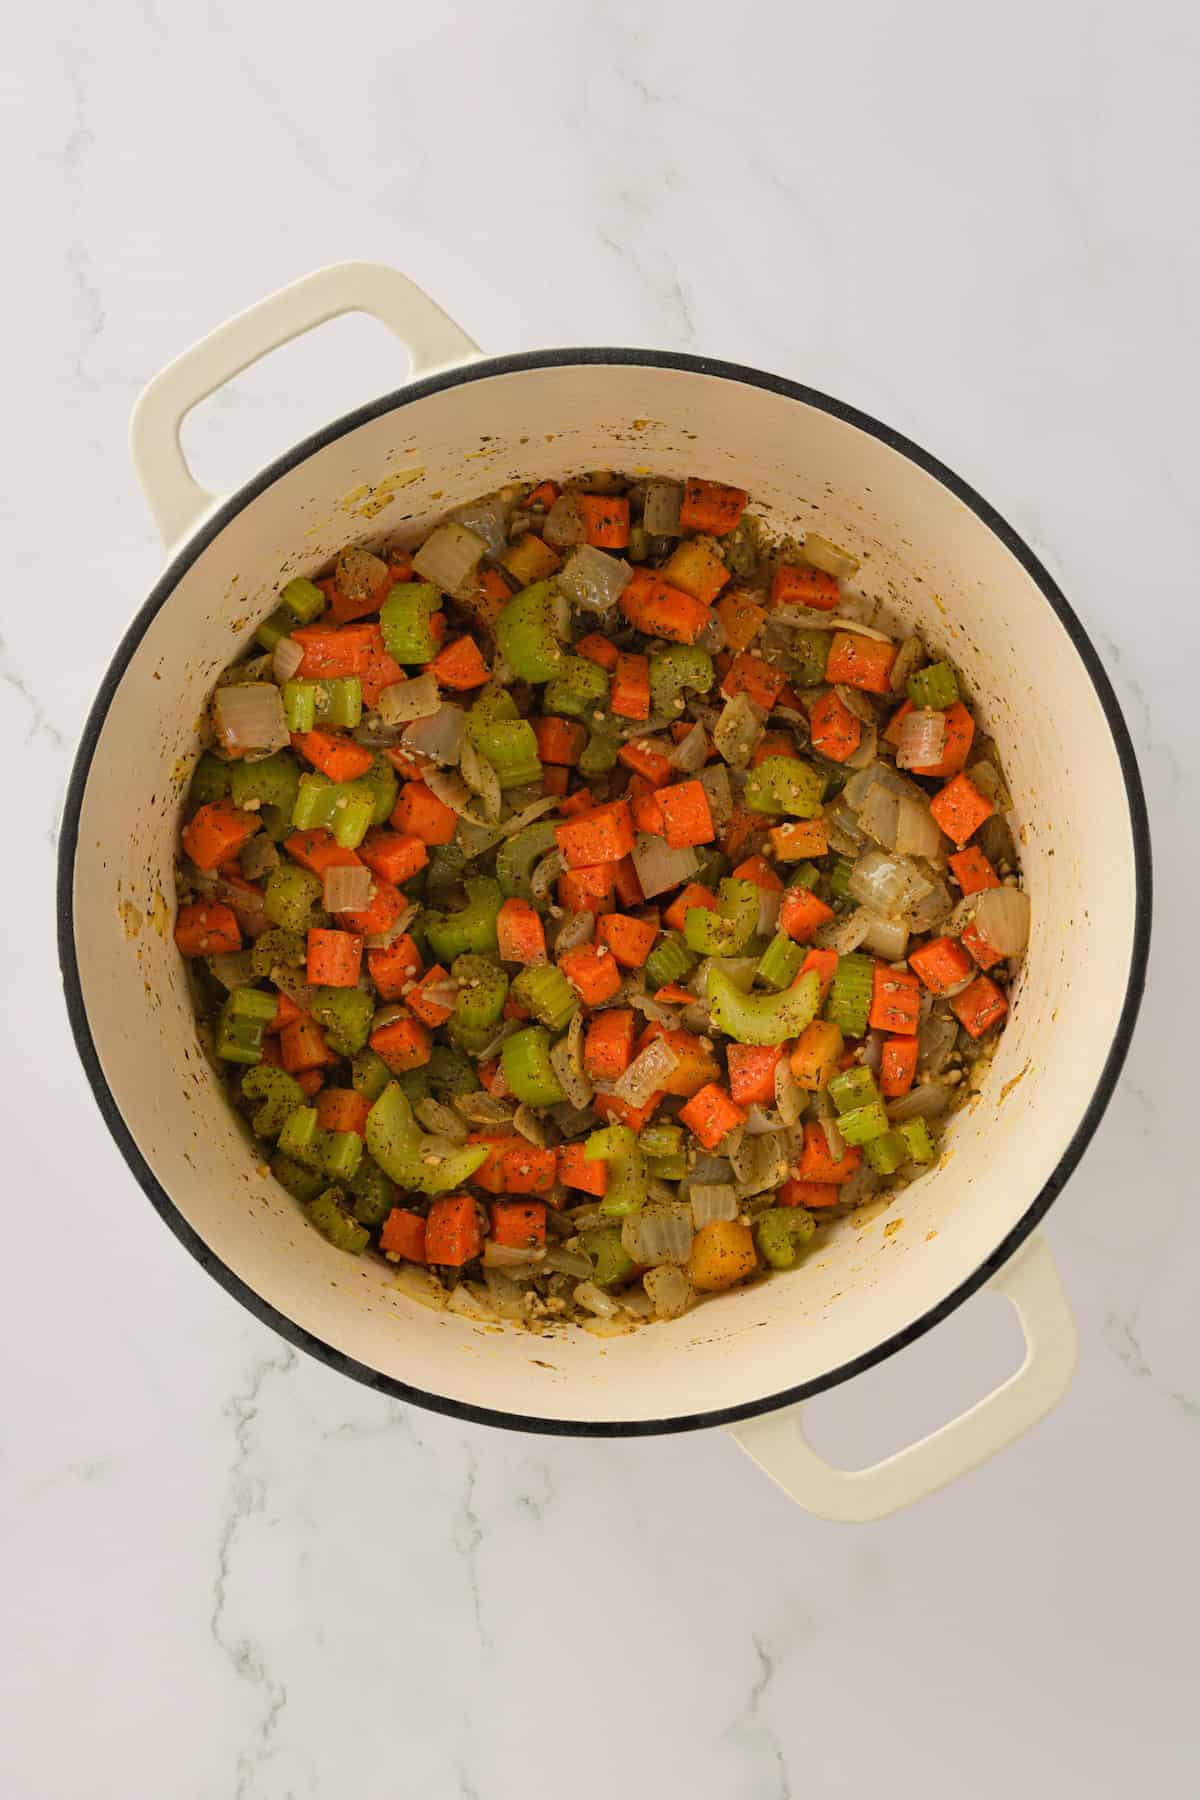 Overhead view of cooked vegetables in Dutch oven